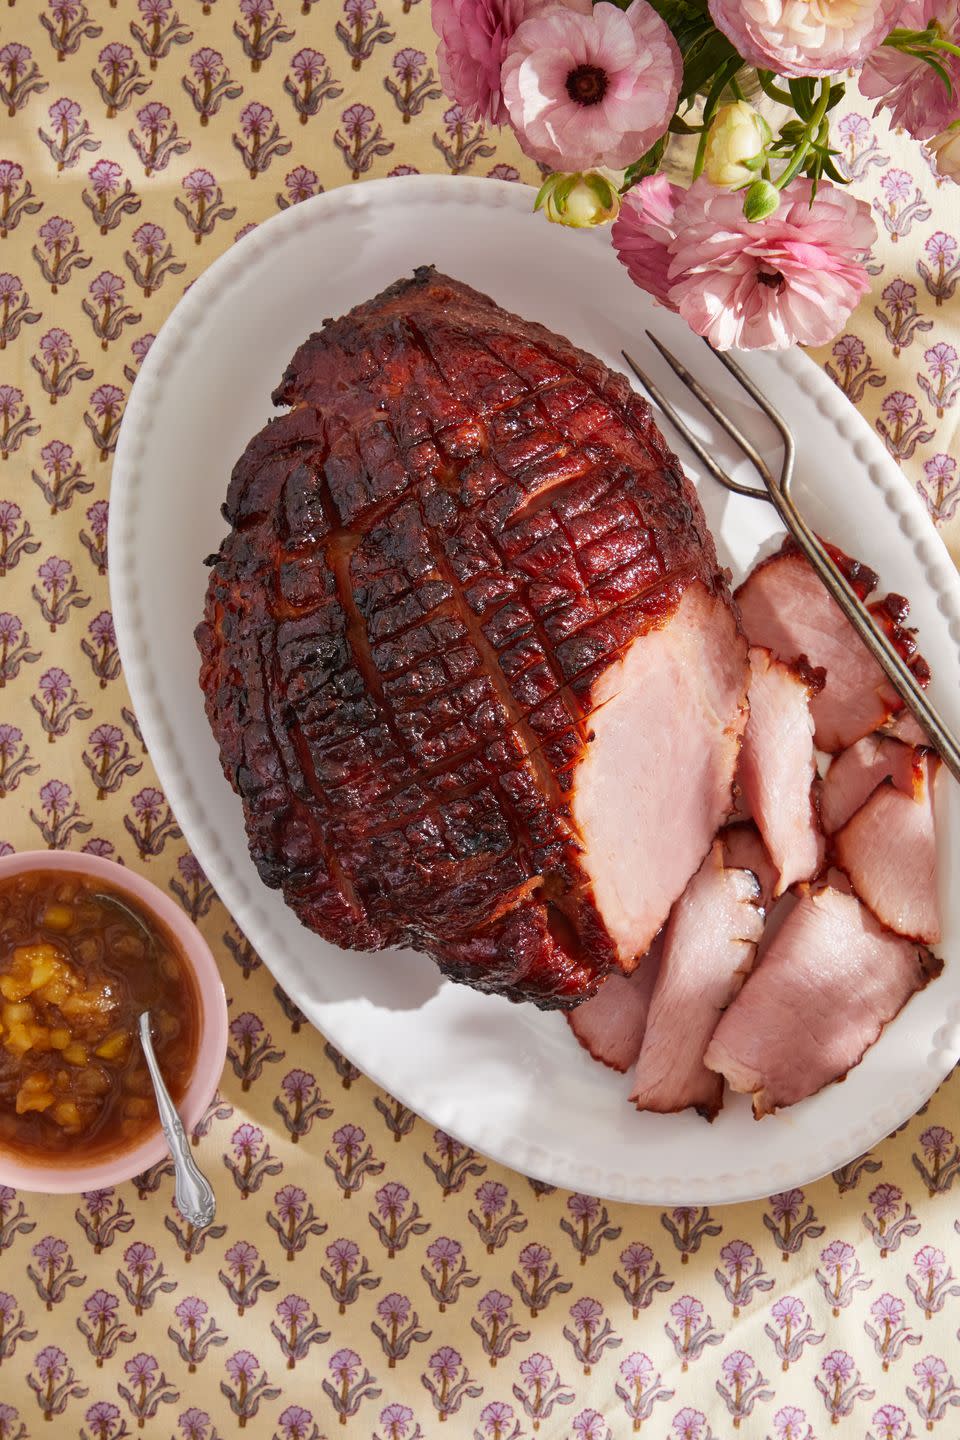 a glazed ham on a plate with some slices cut off